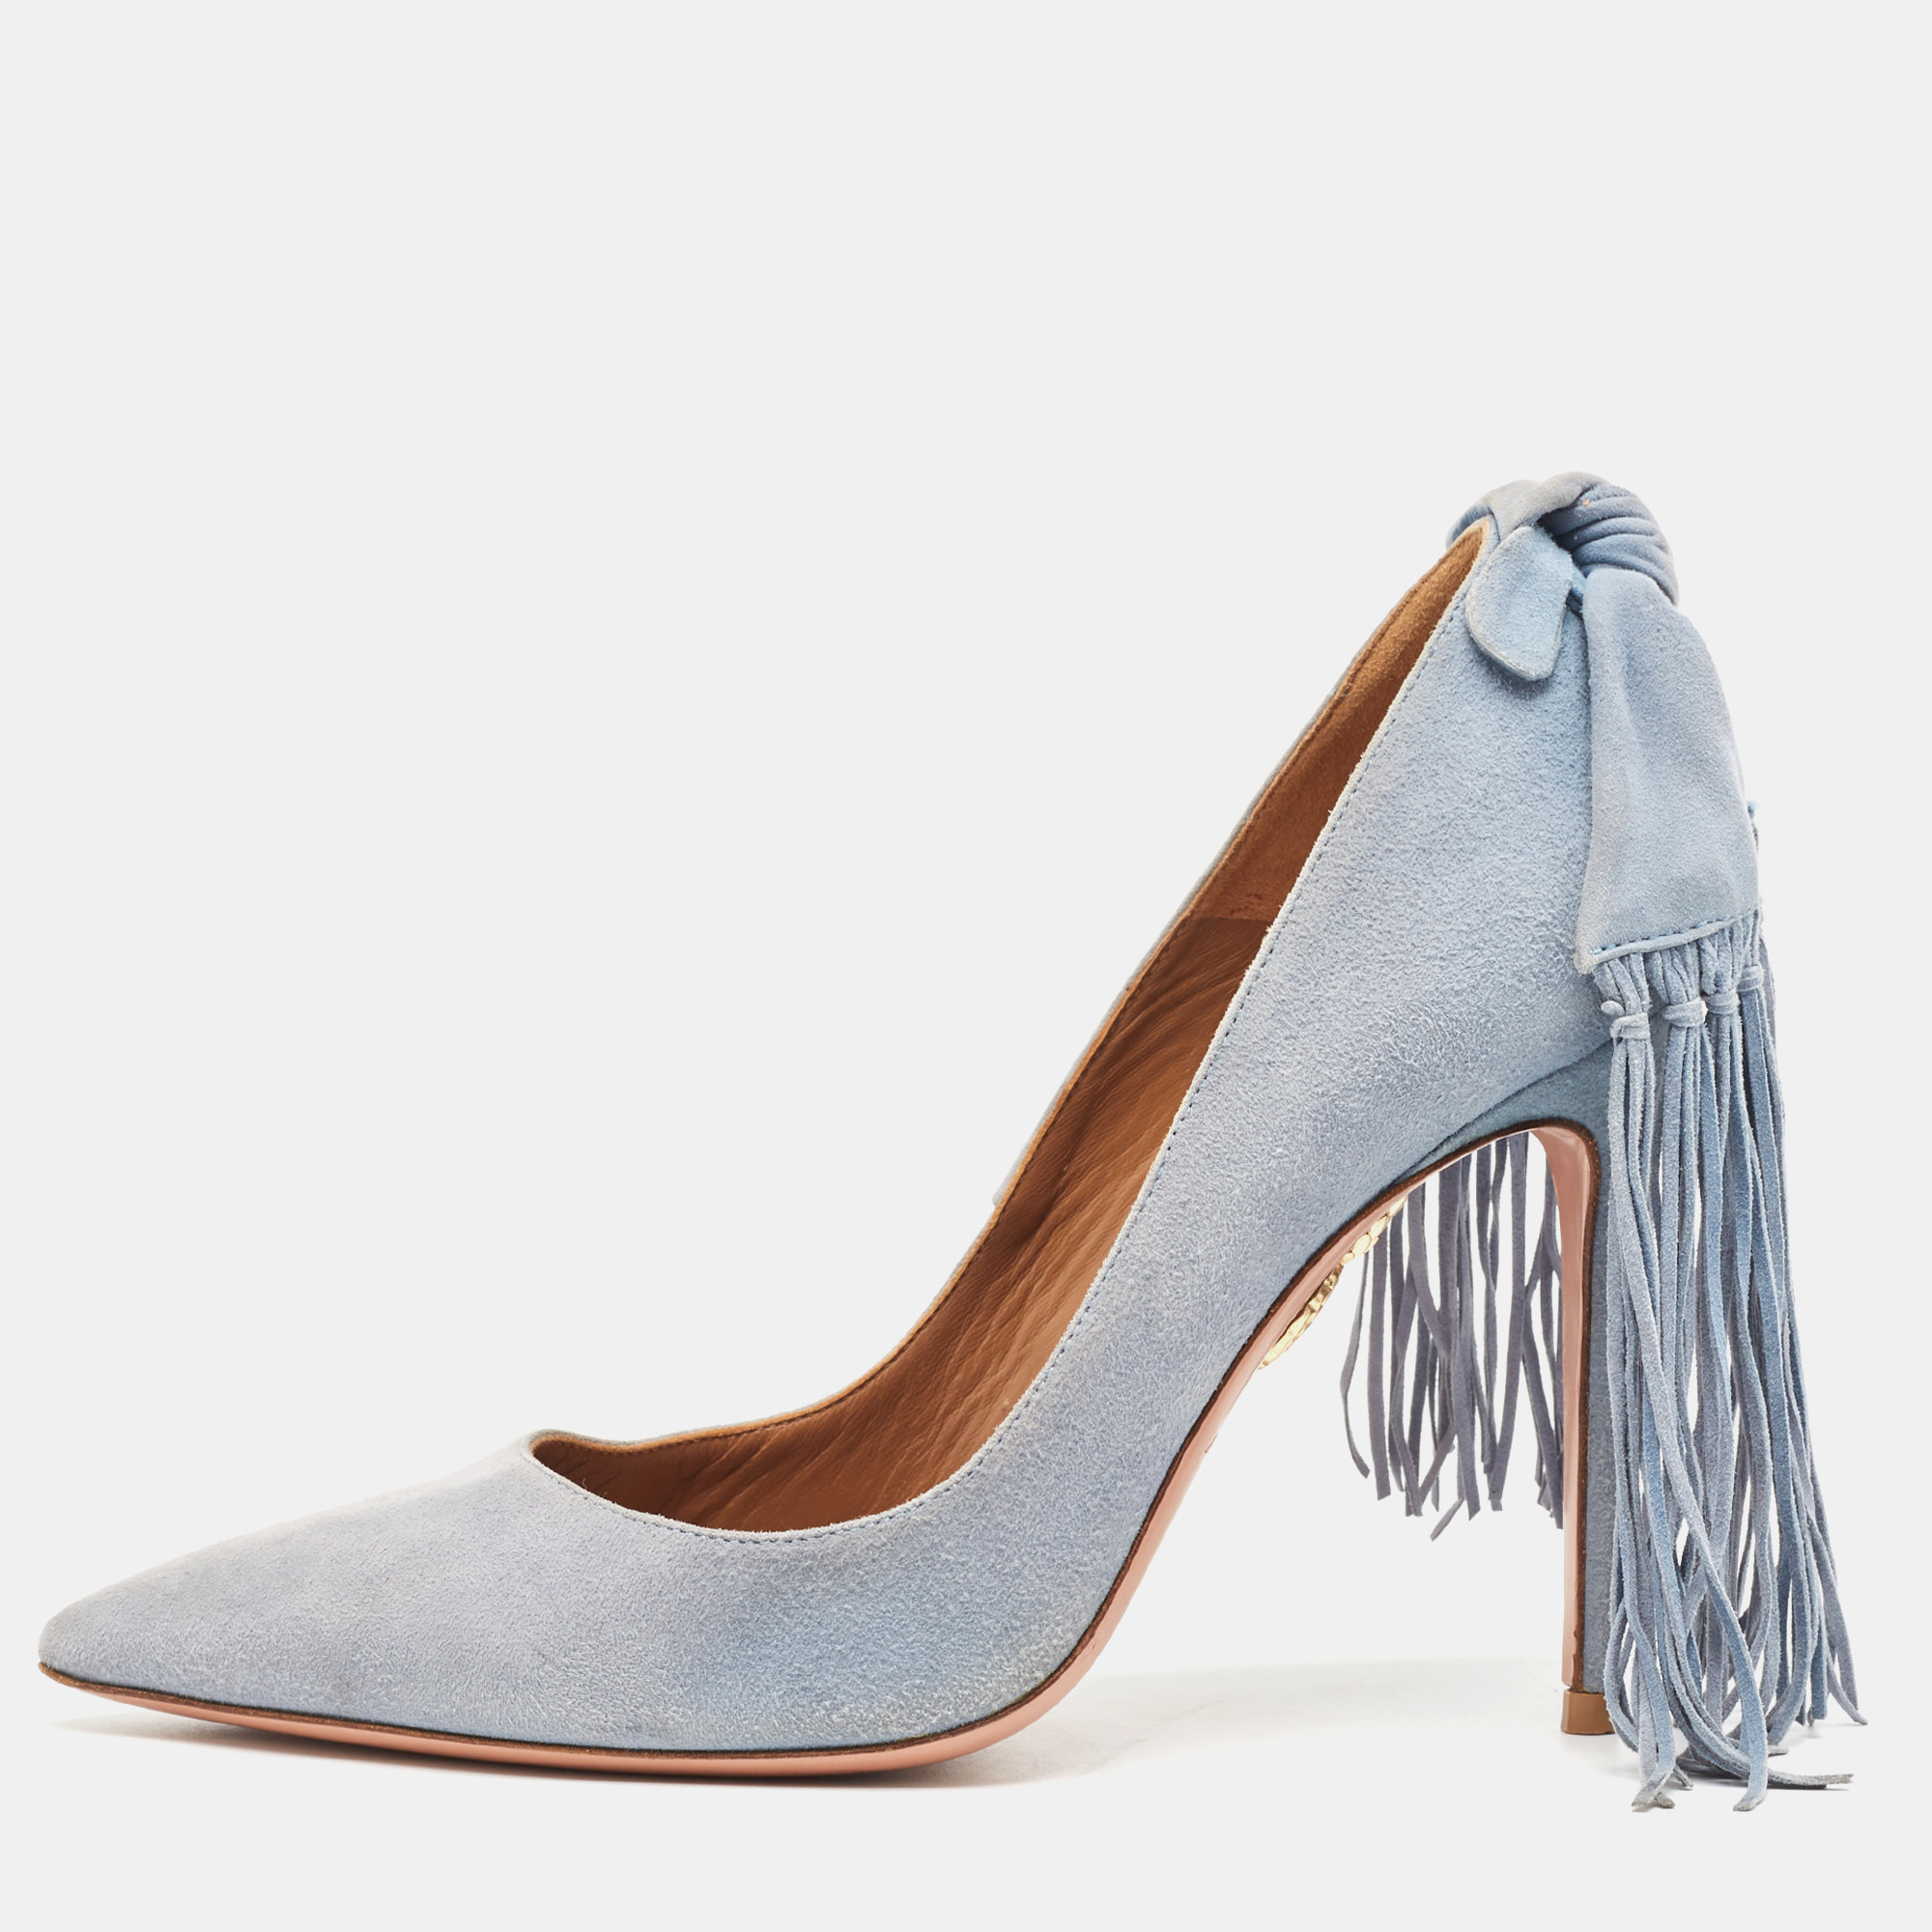 Discover footwear elegance with these Aquazzura womens pumps. Meticulously designed these heels seamlessly marry fashion and comfort ensuring you shine in every setting.